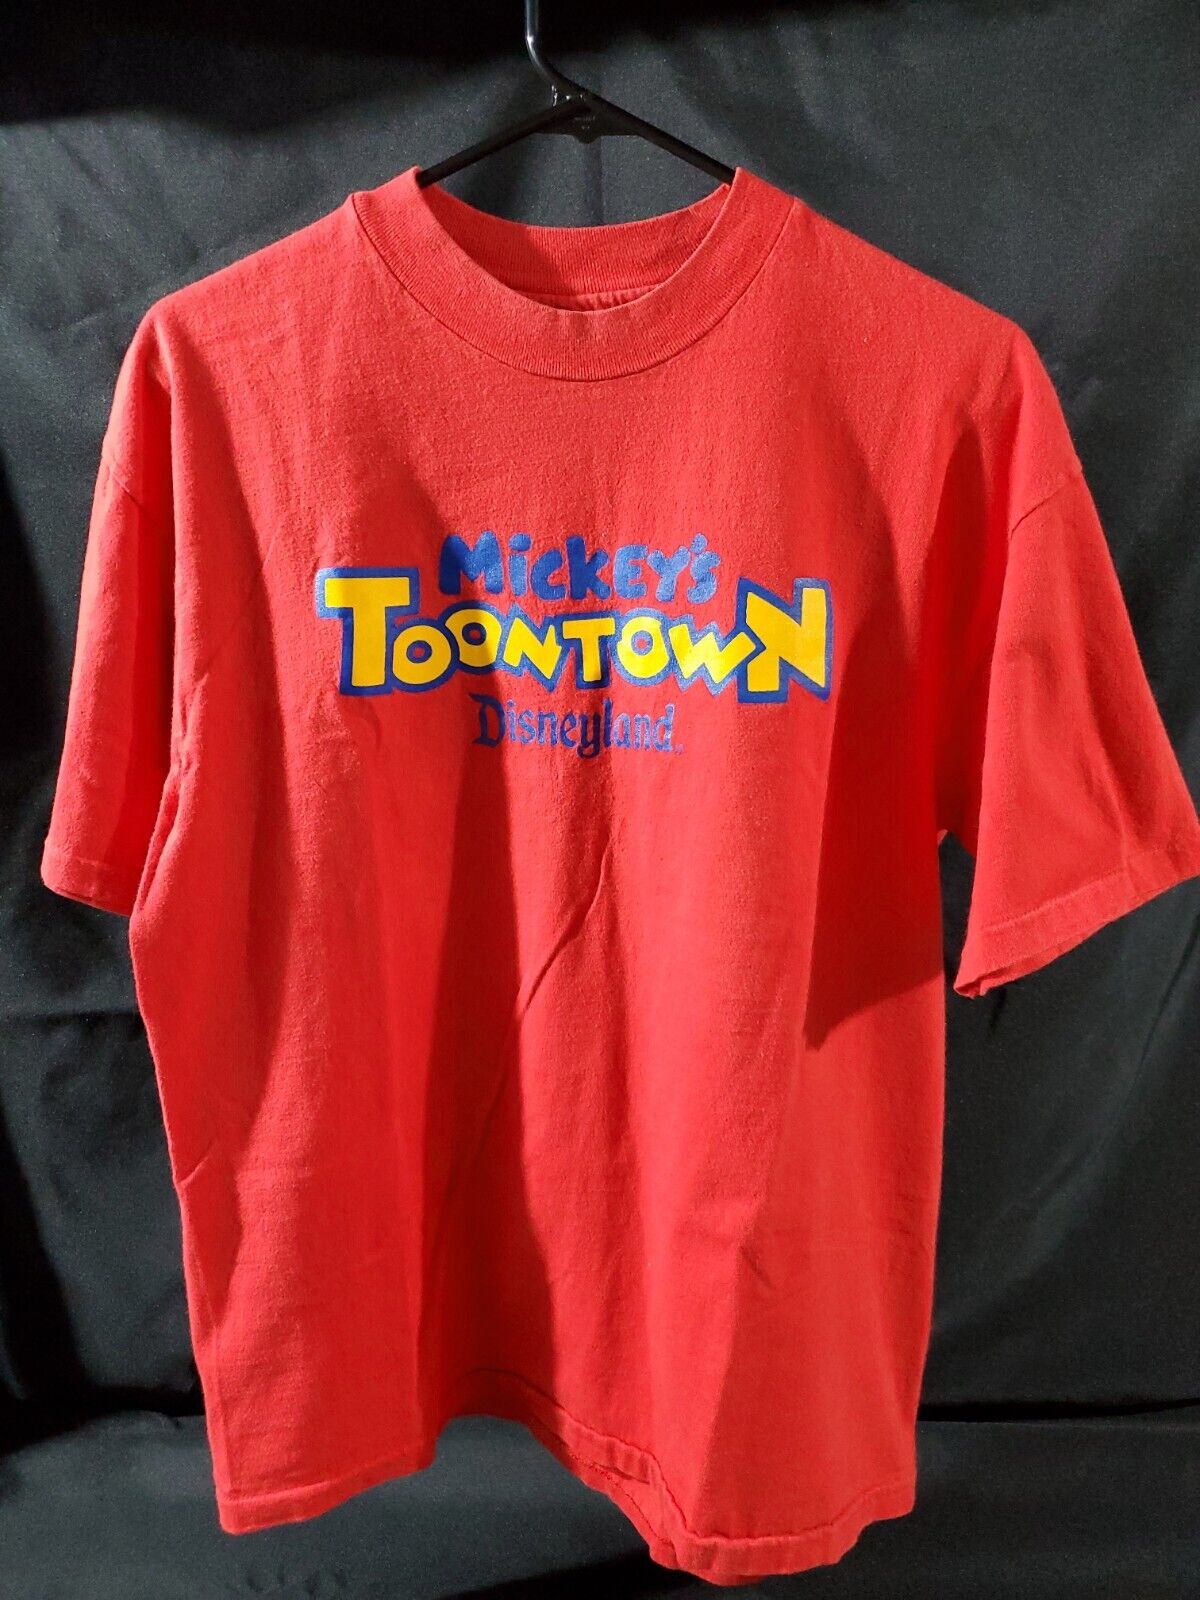 Mickey Mouse Toontown Disney land Shirt, Red, Large tshirt vintage